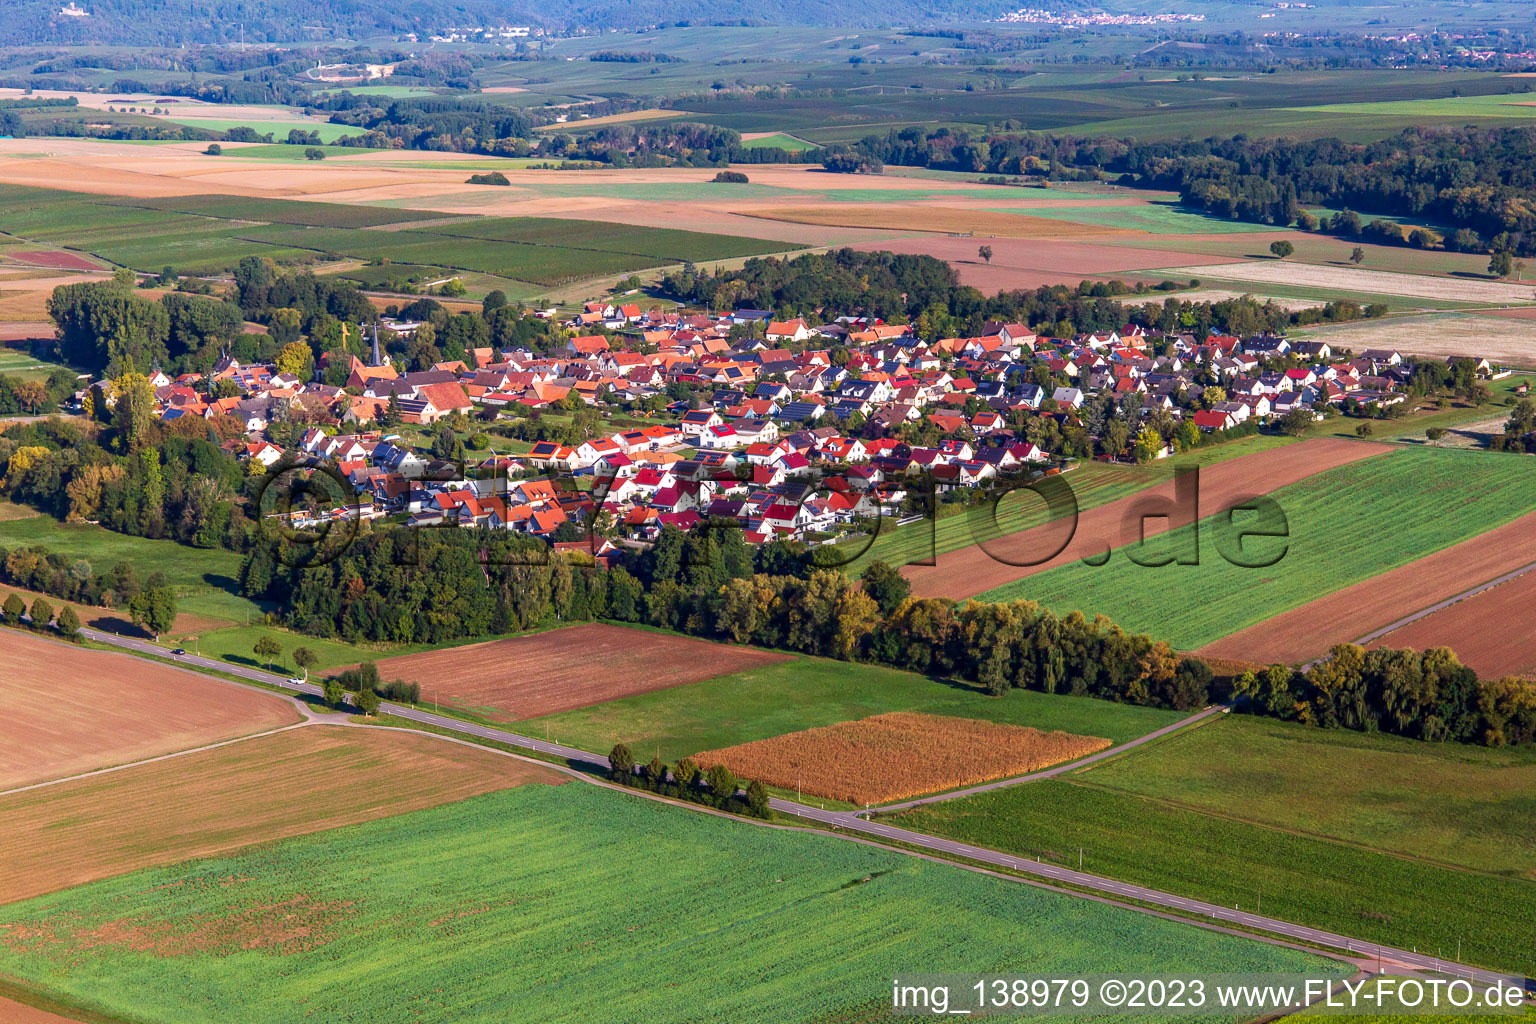 From the southeast in Barbelroth in the state Rhineland-Palatinate, Germany